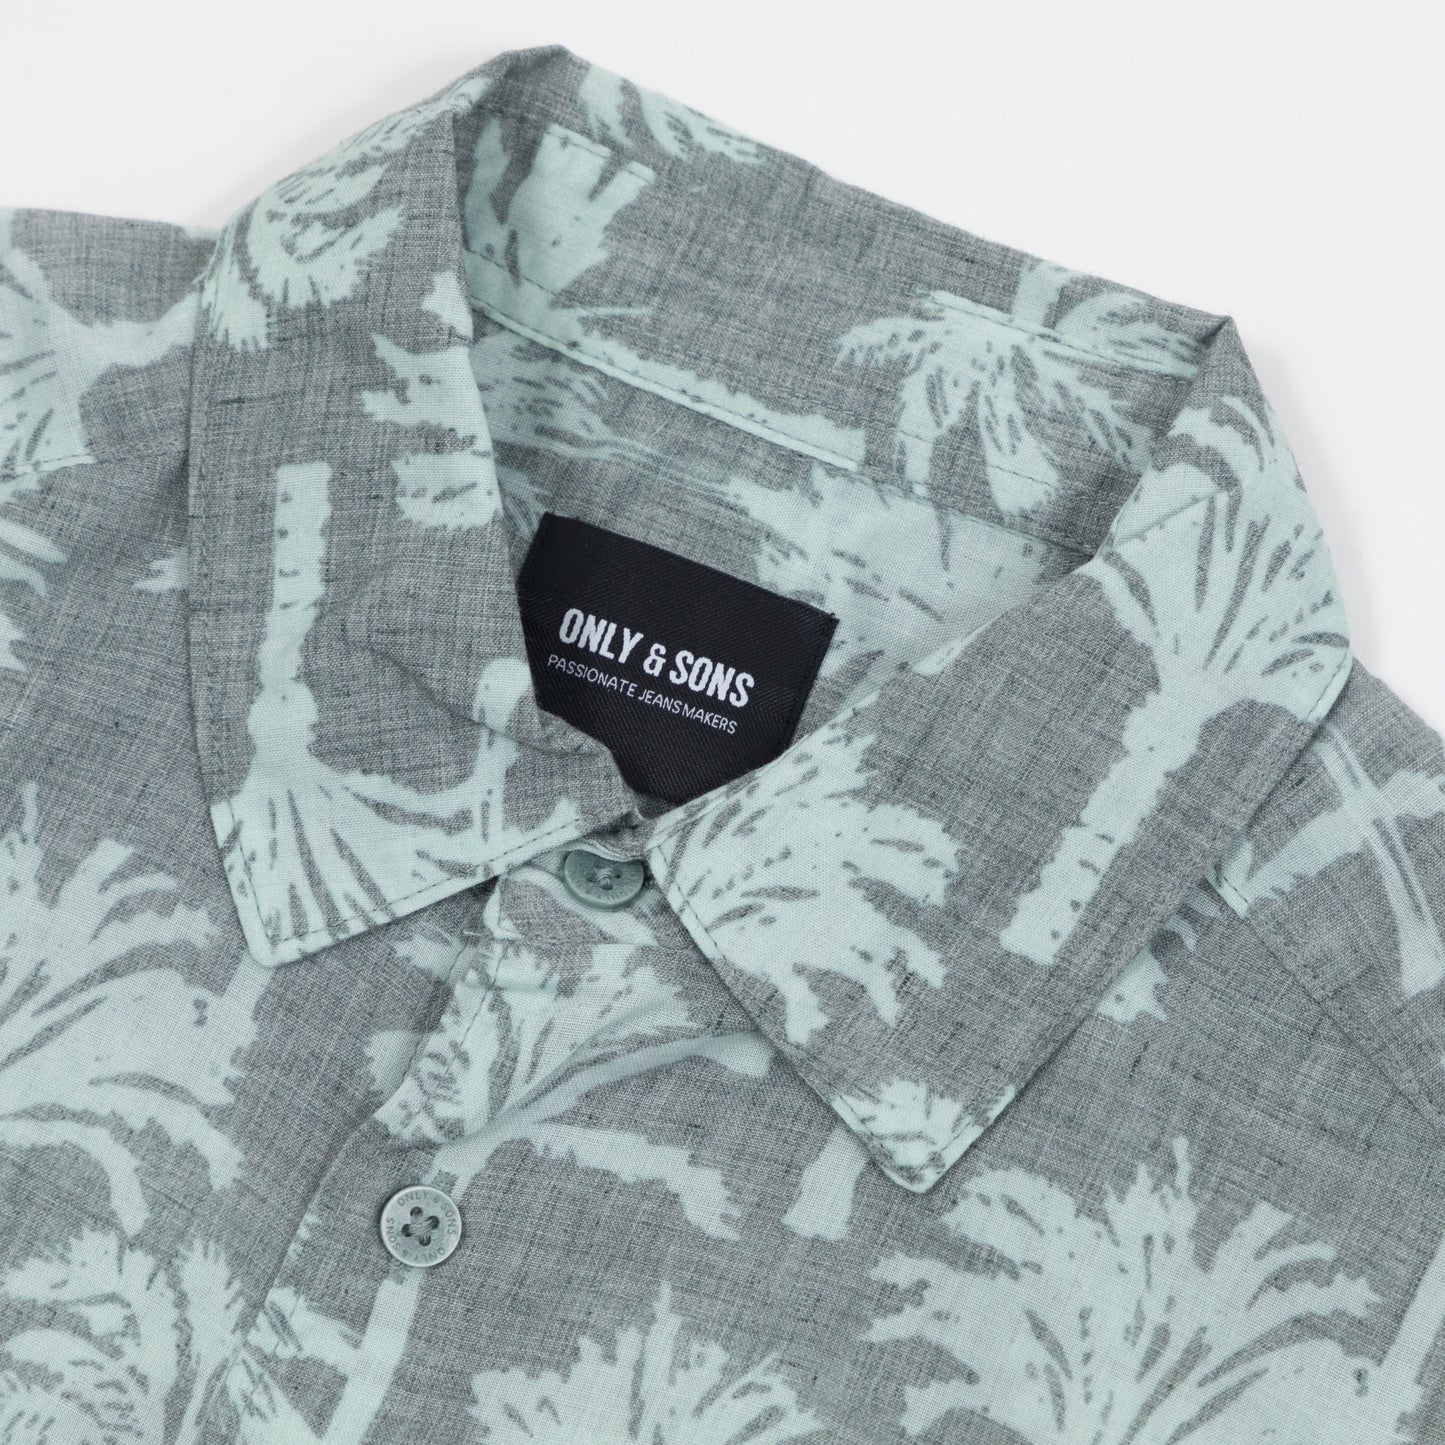 ONLY & SONS Palm Tree Shirt in GREY